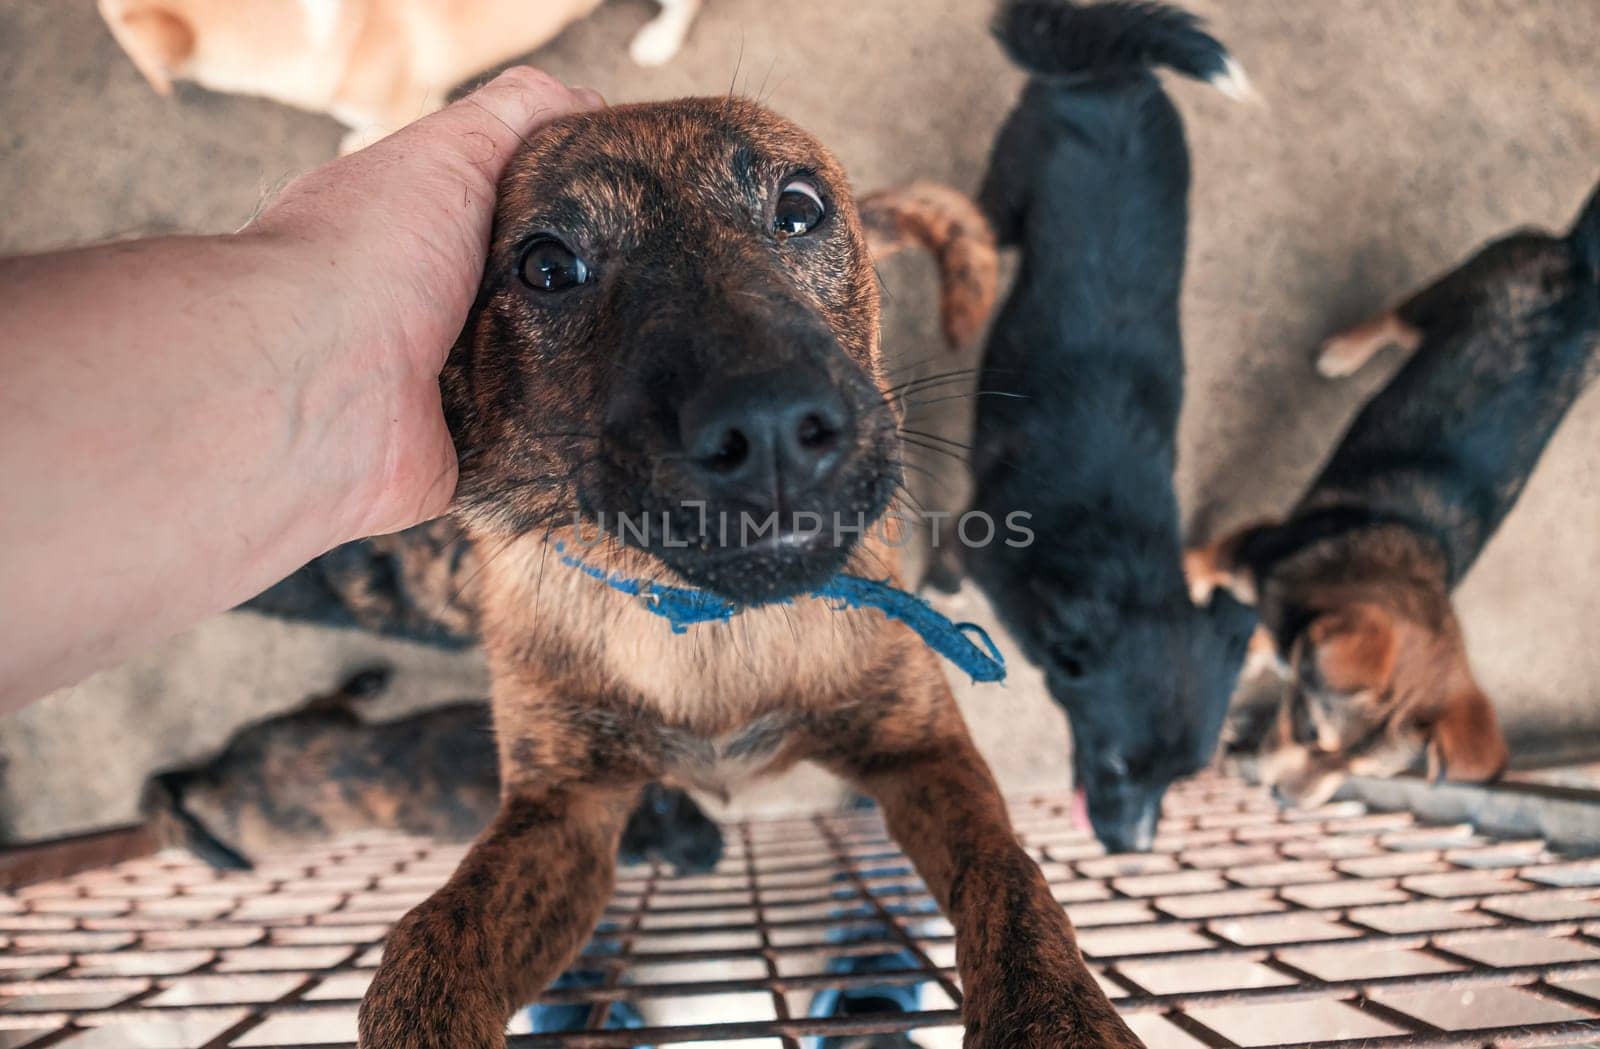 Male hand petting stray dog in pet shelter. People, Animals, Volunteering And Helping Concept.